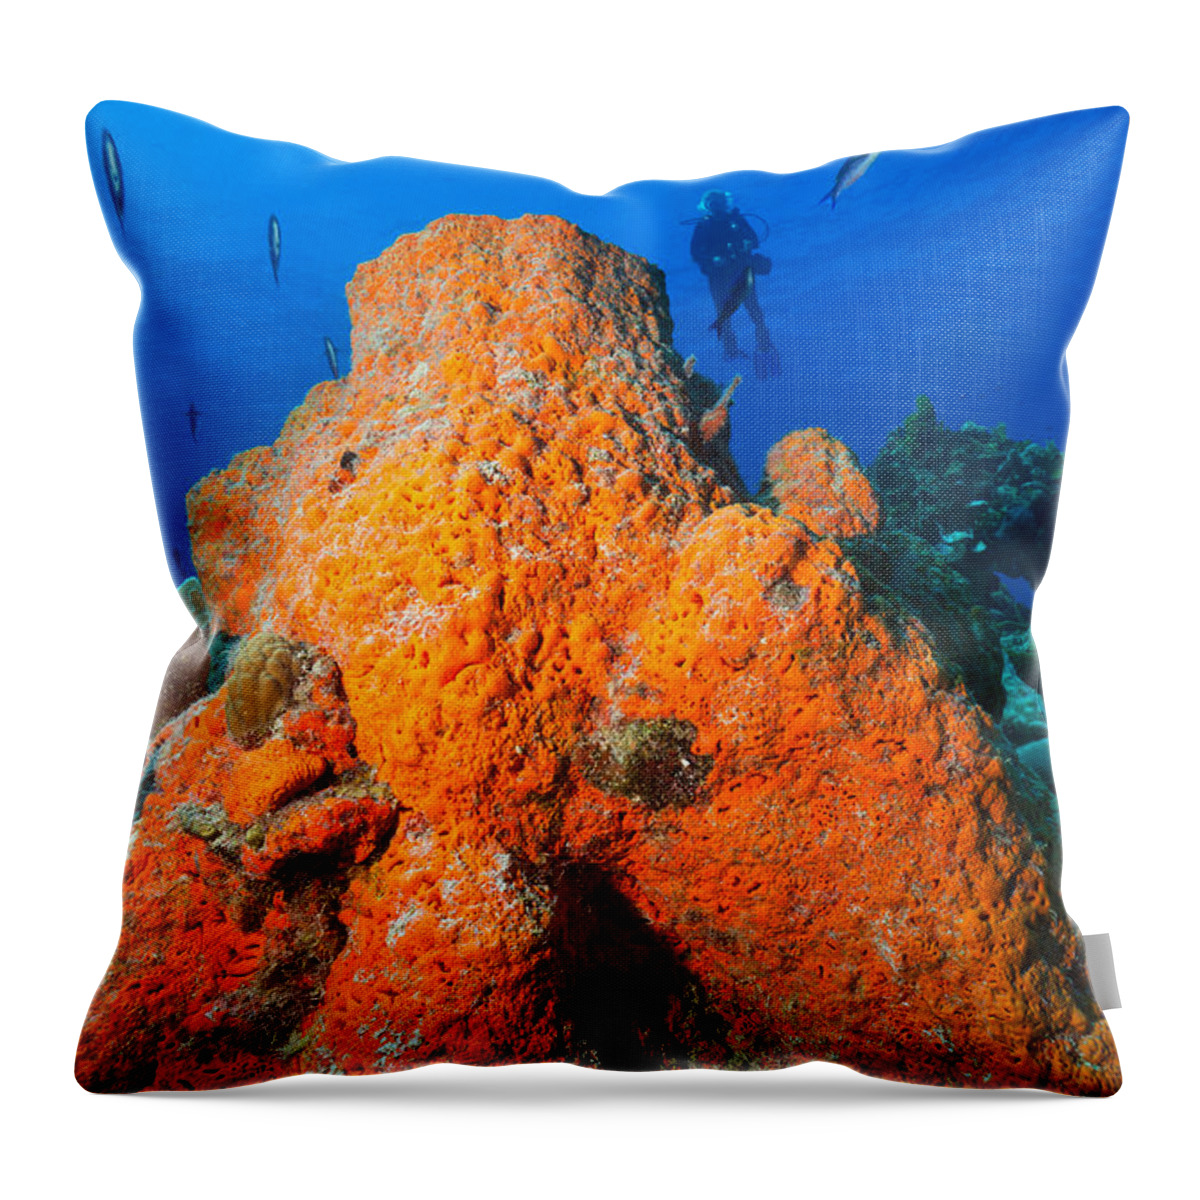 Orange Elephant Ear Sponge Throw Pillow featuring the photograph Sponge Mountain by Aaron Whittemore